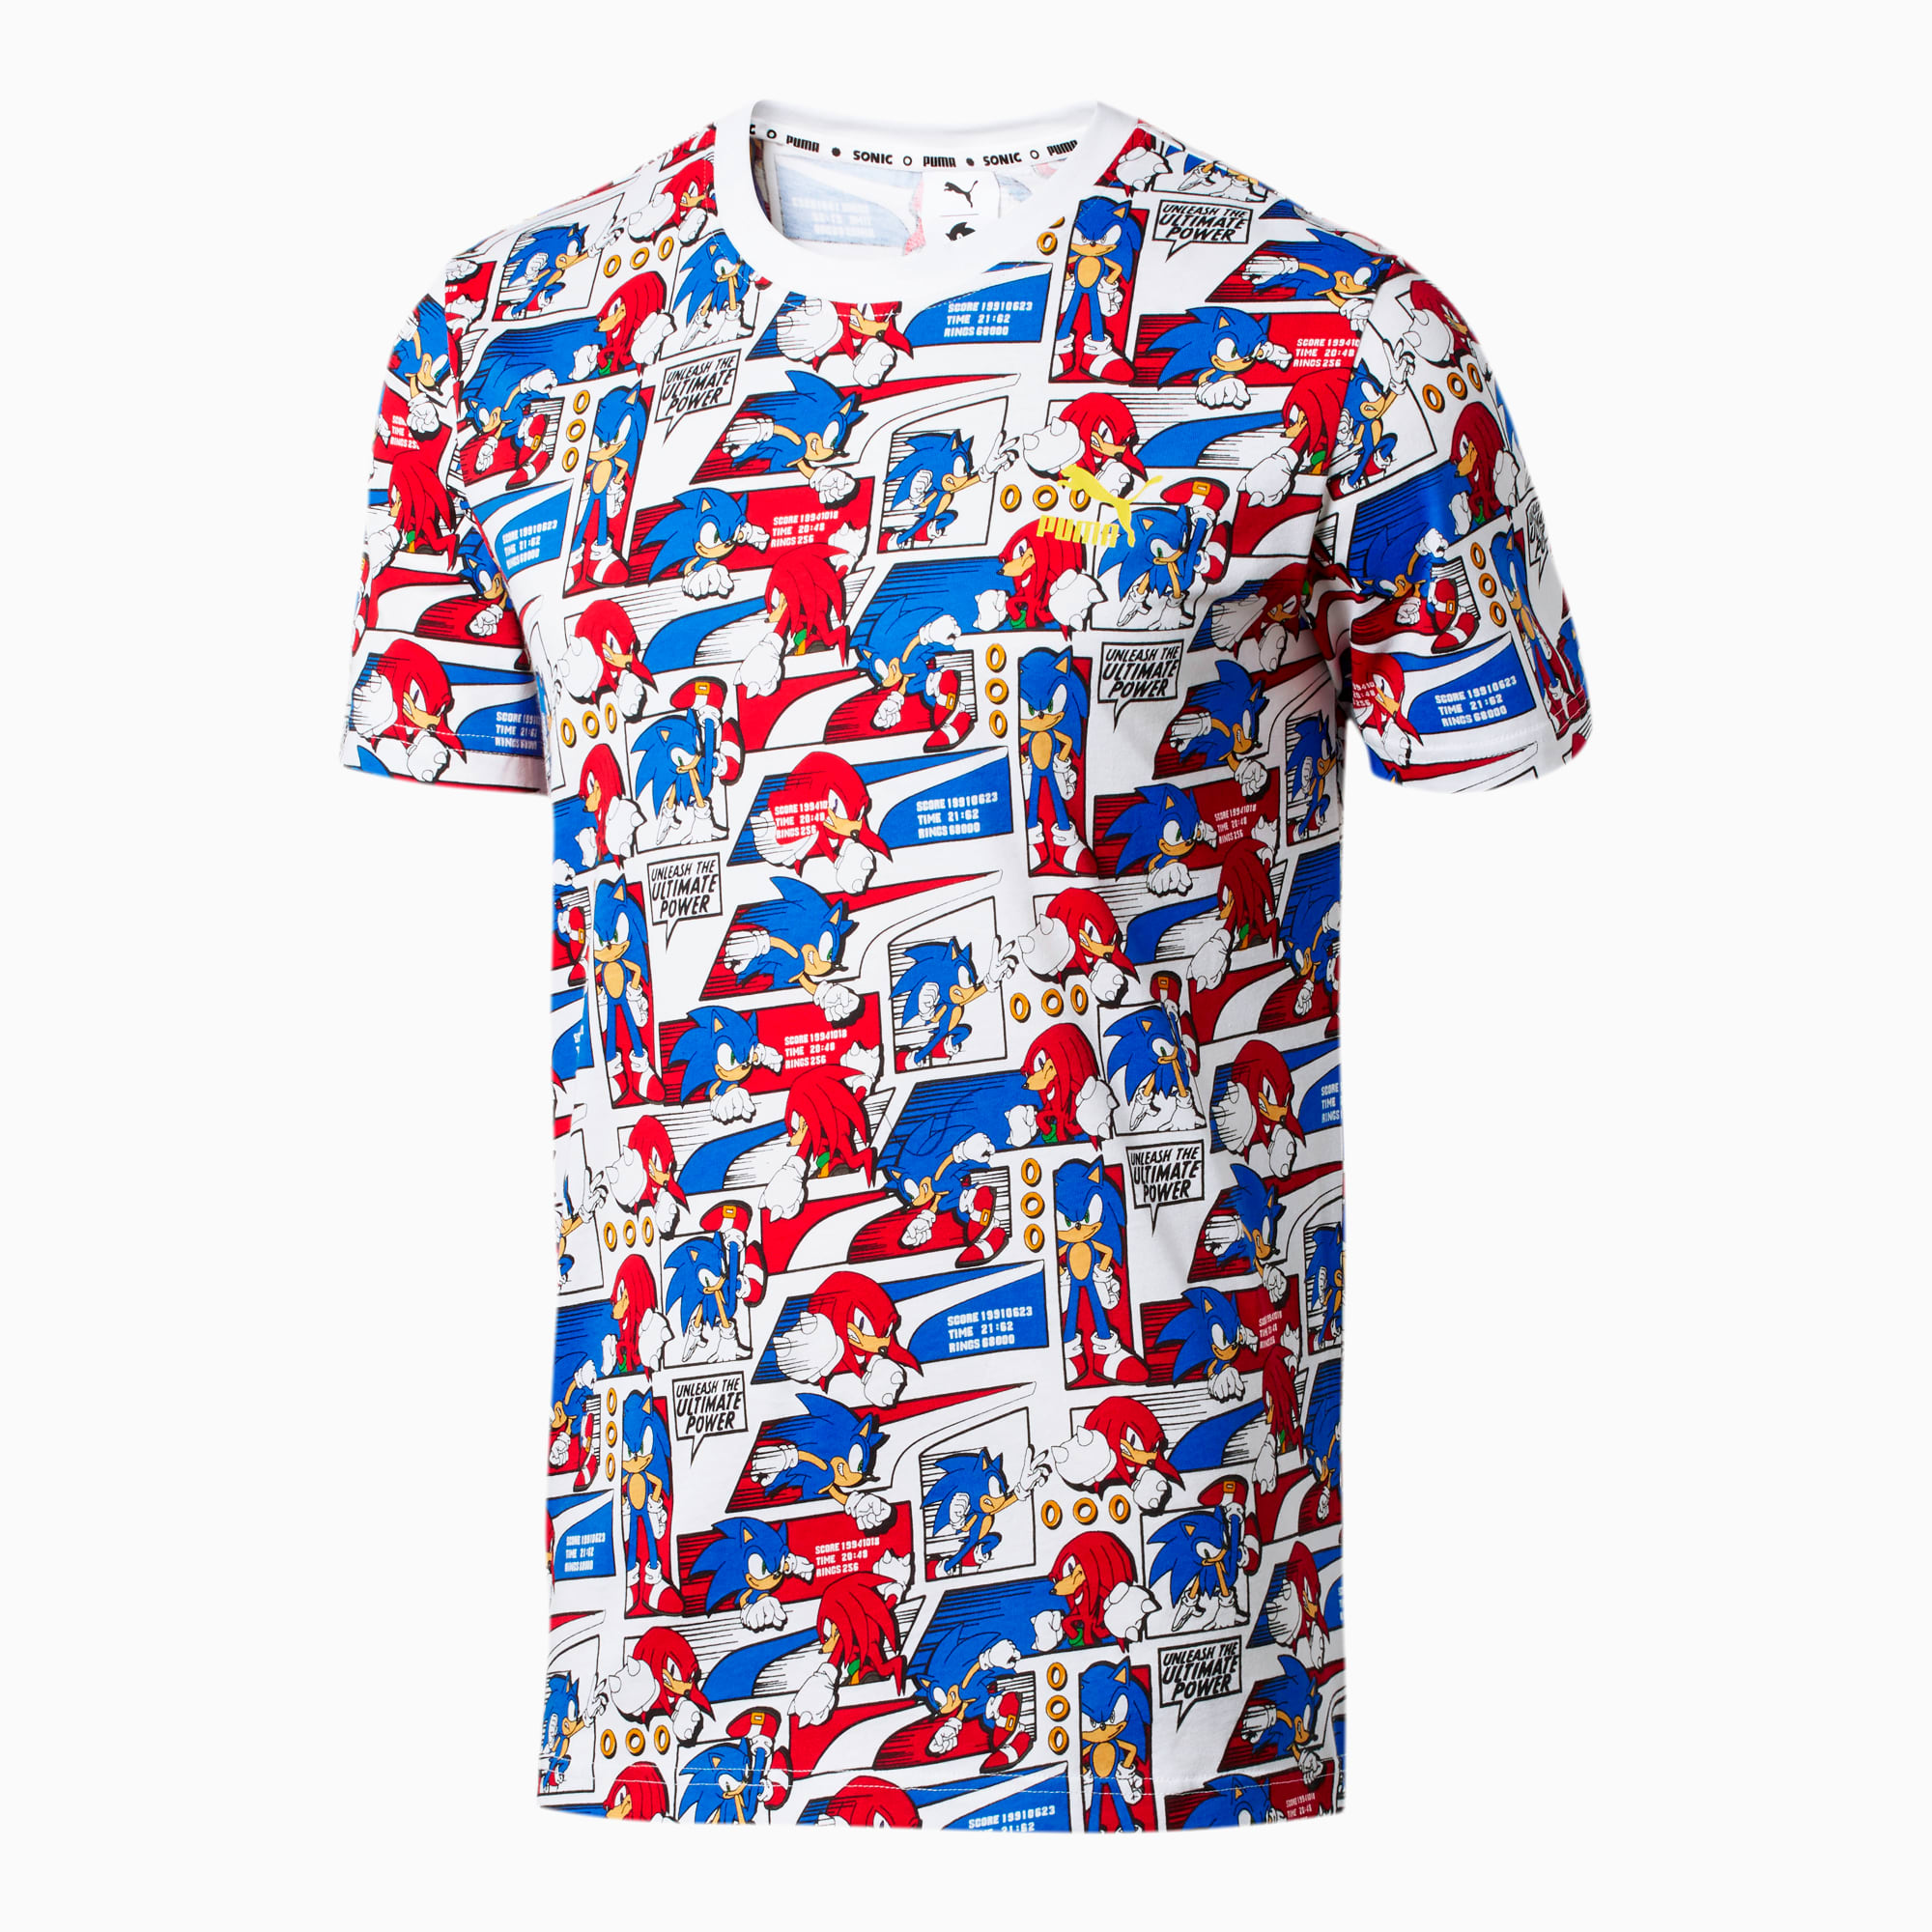 PUMA x SONIC All-Over Printed Men's Tee 